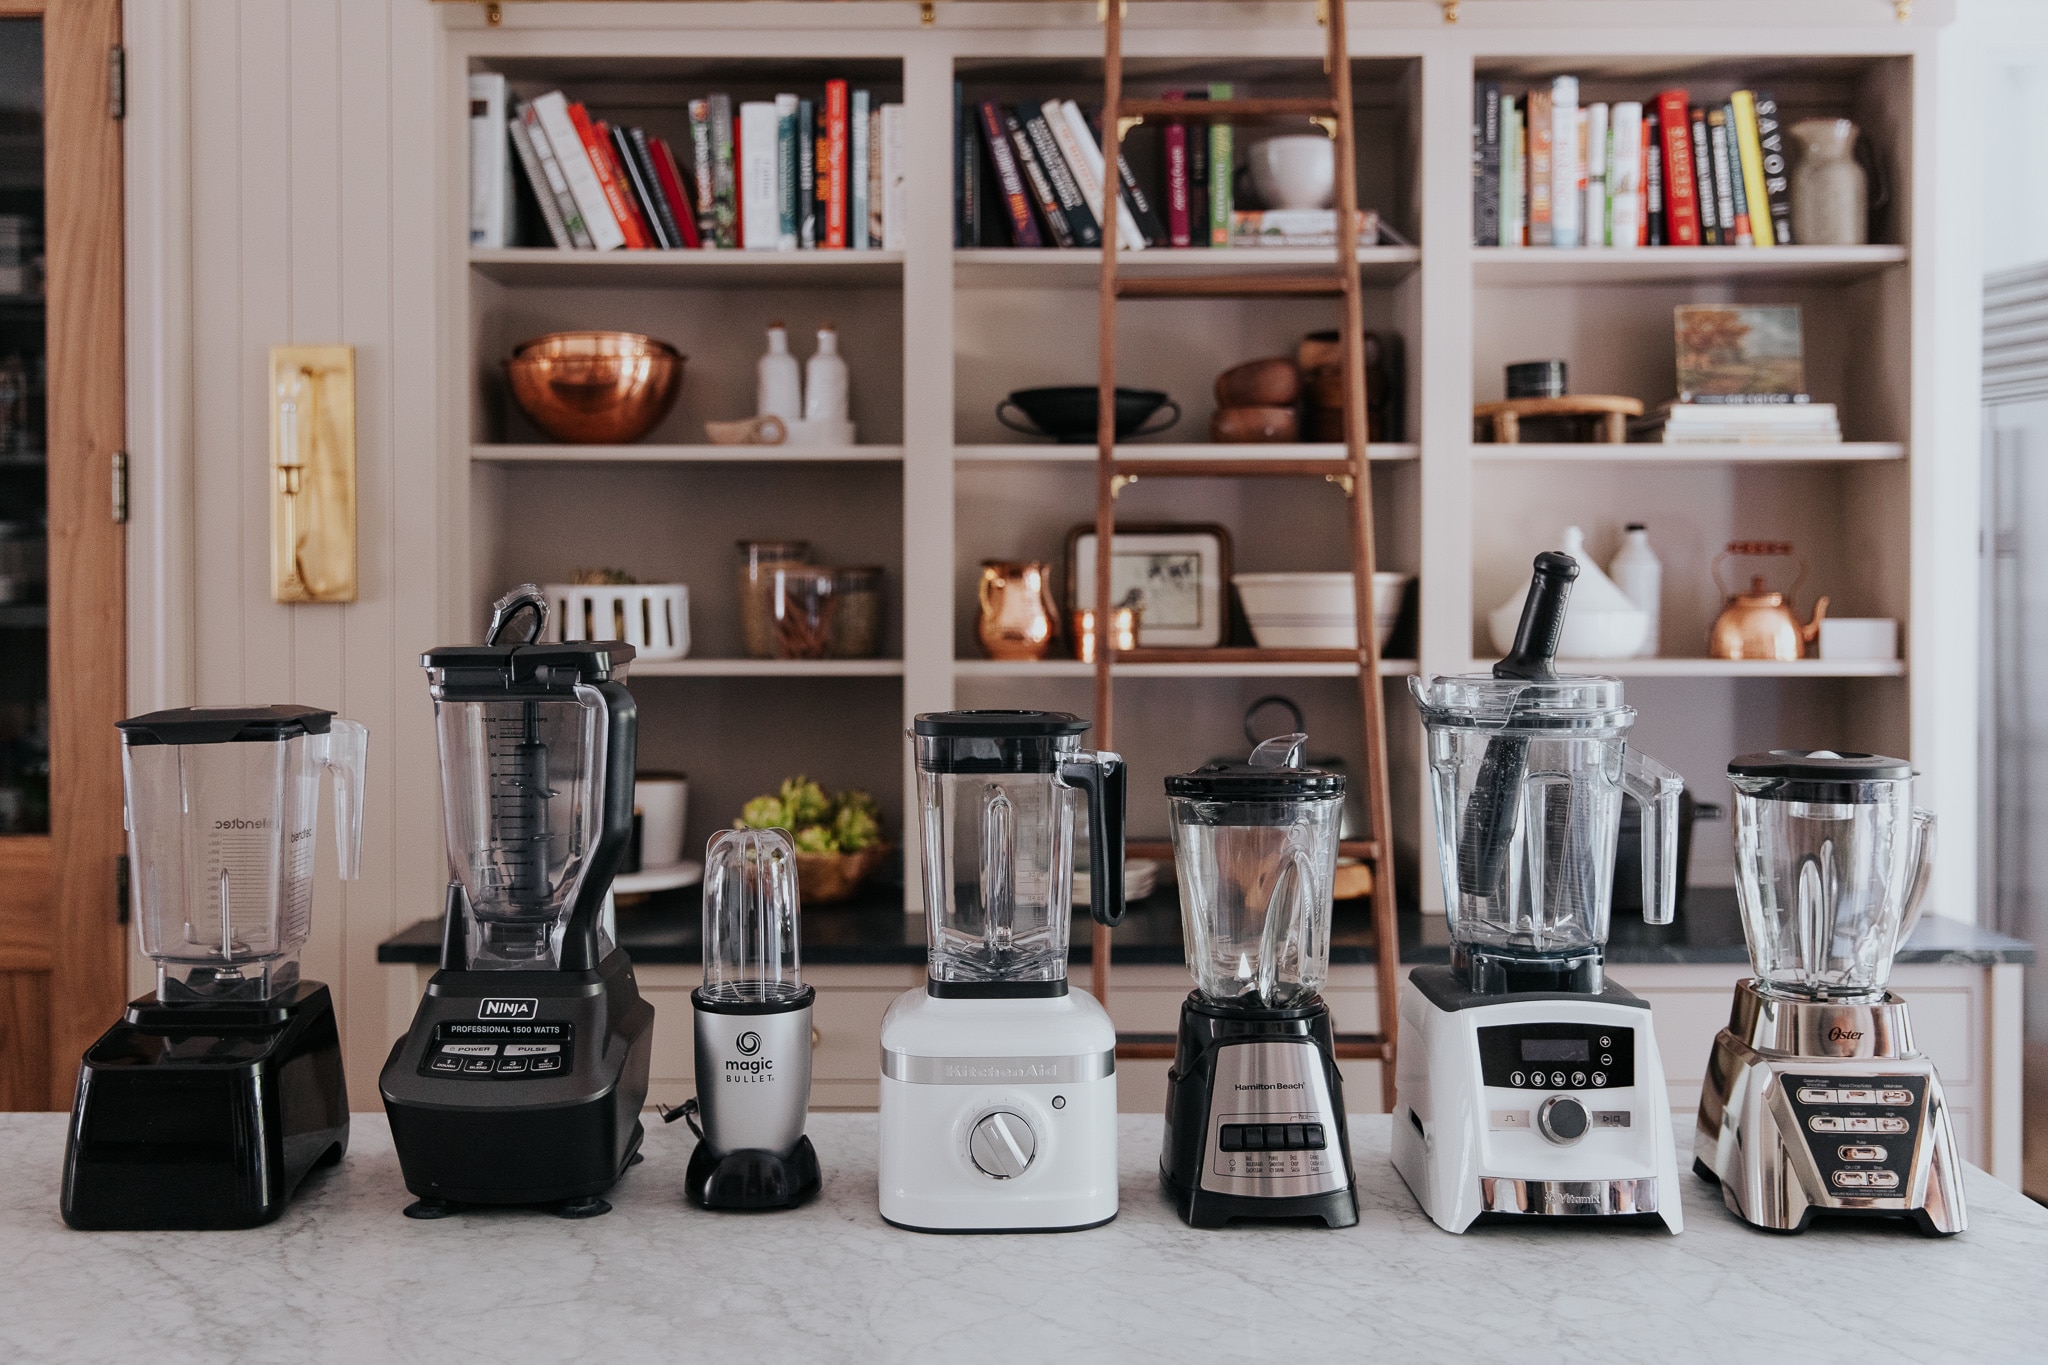 The 5 Best Blenders (2023 Review) - This Old House